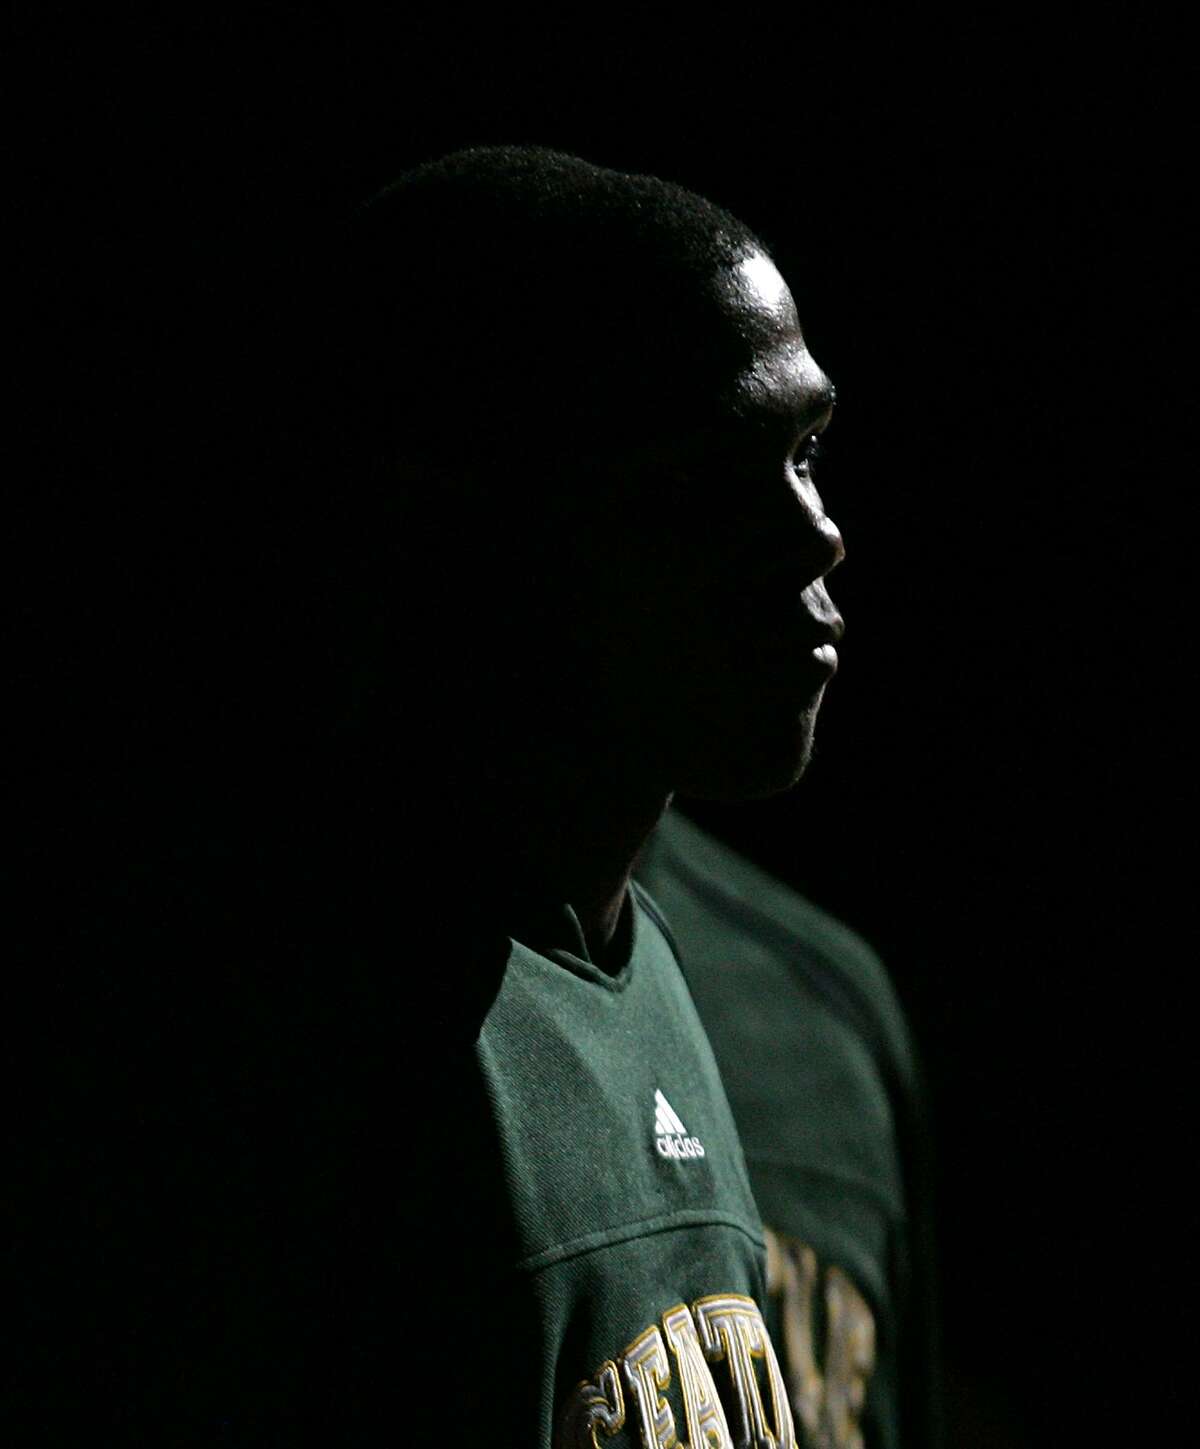 Seattle SuperSonics' Kevin Durant is lit with a spotlight during player introductions prior to an NBA exhibition basketball game against the Golden State Warriors Tuesday, Oct. 23, 2007 at KeyArena in Seattle.